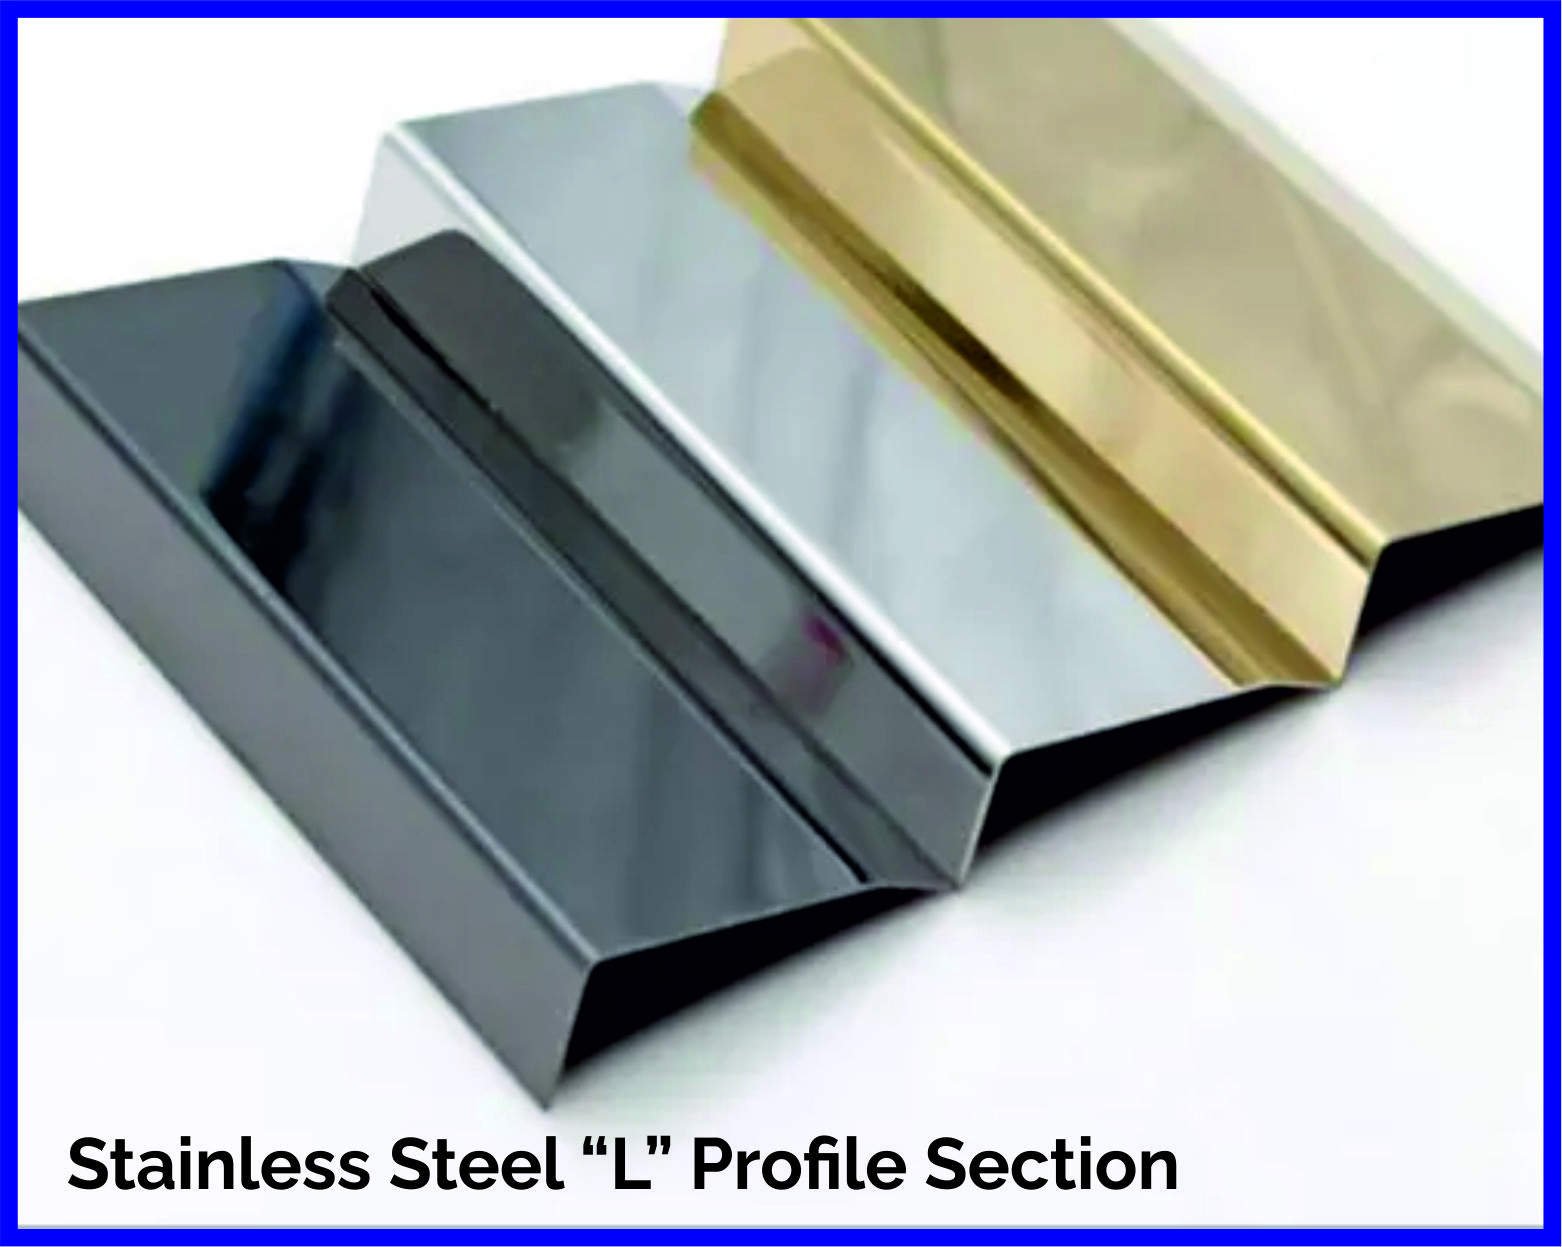 Decorative Stainless Steel L Profile Section